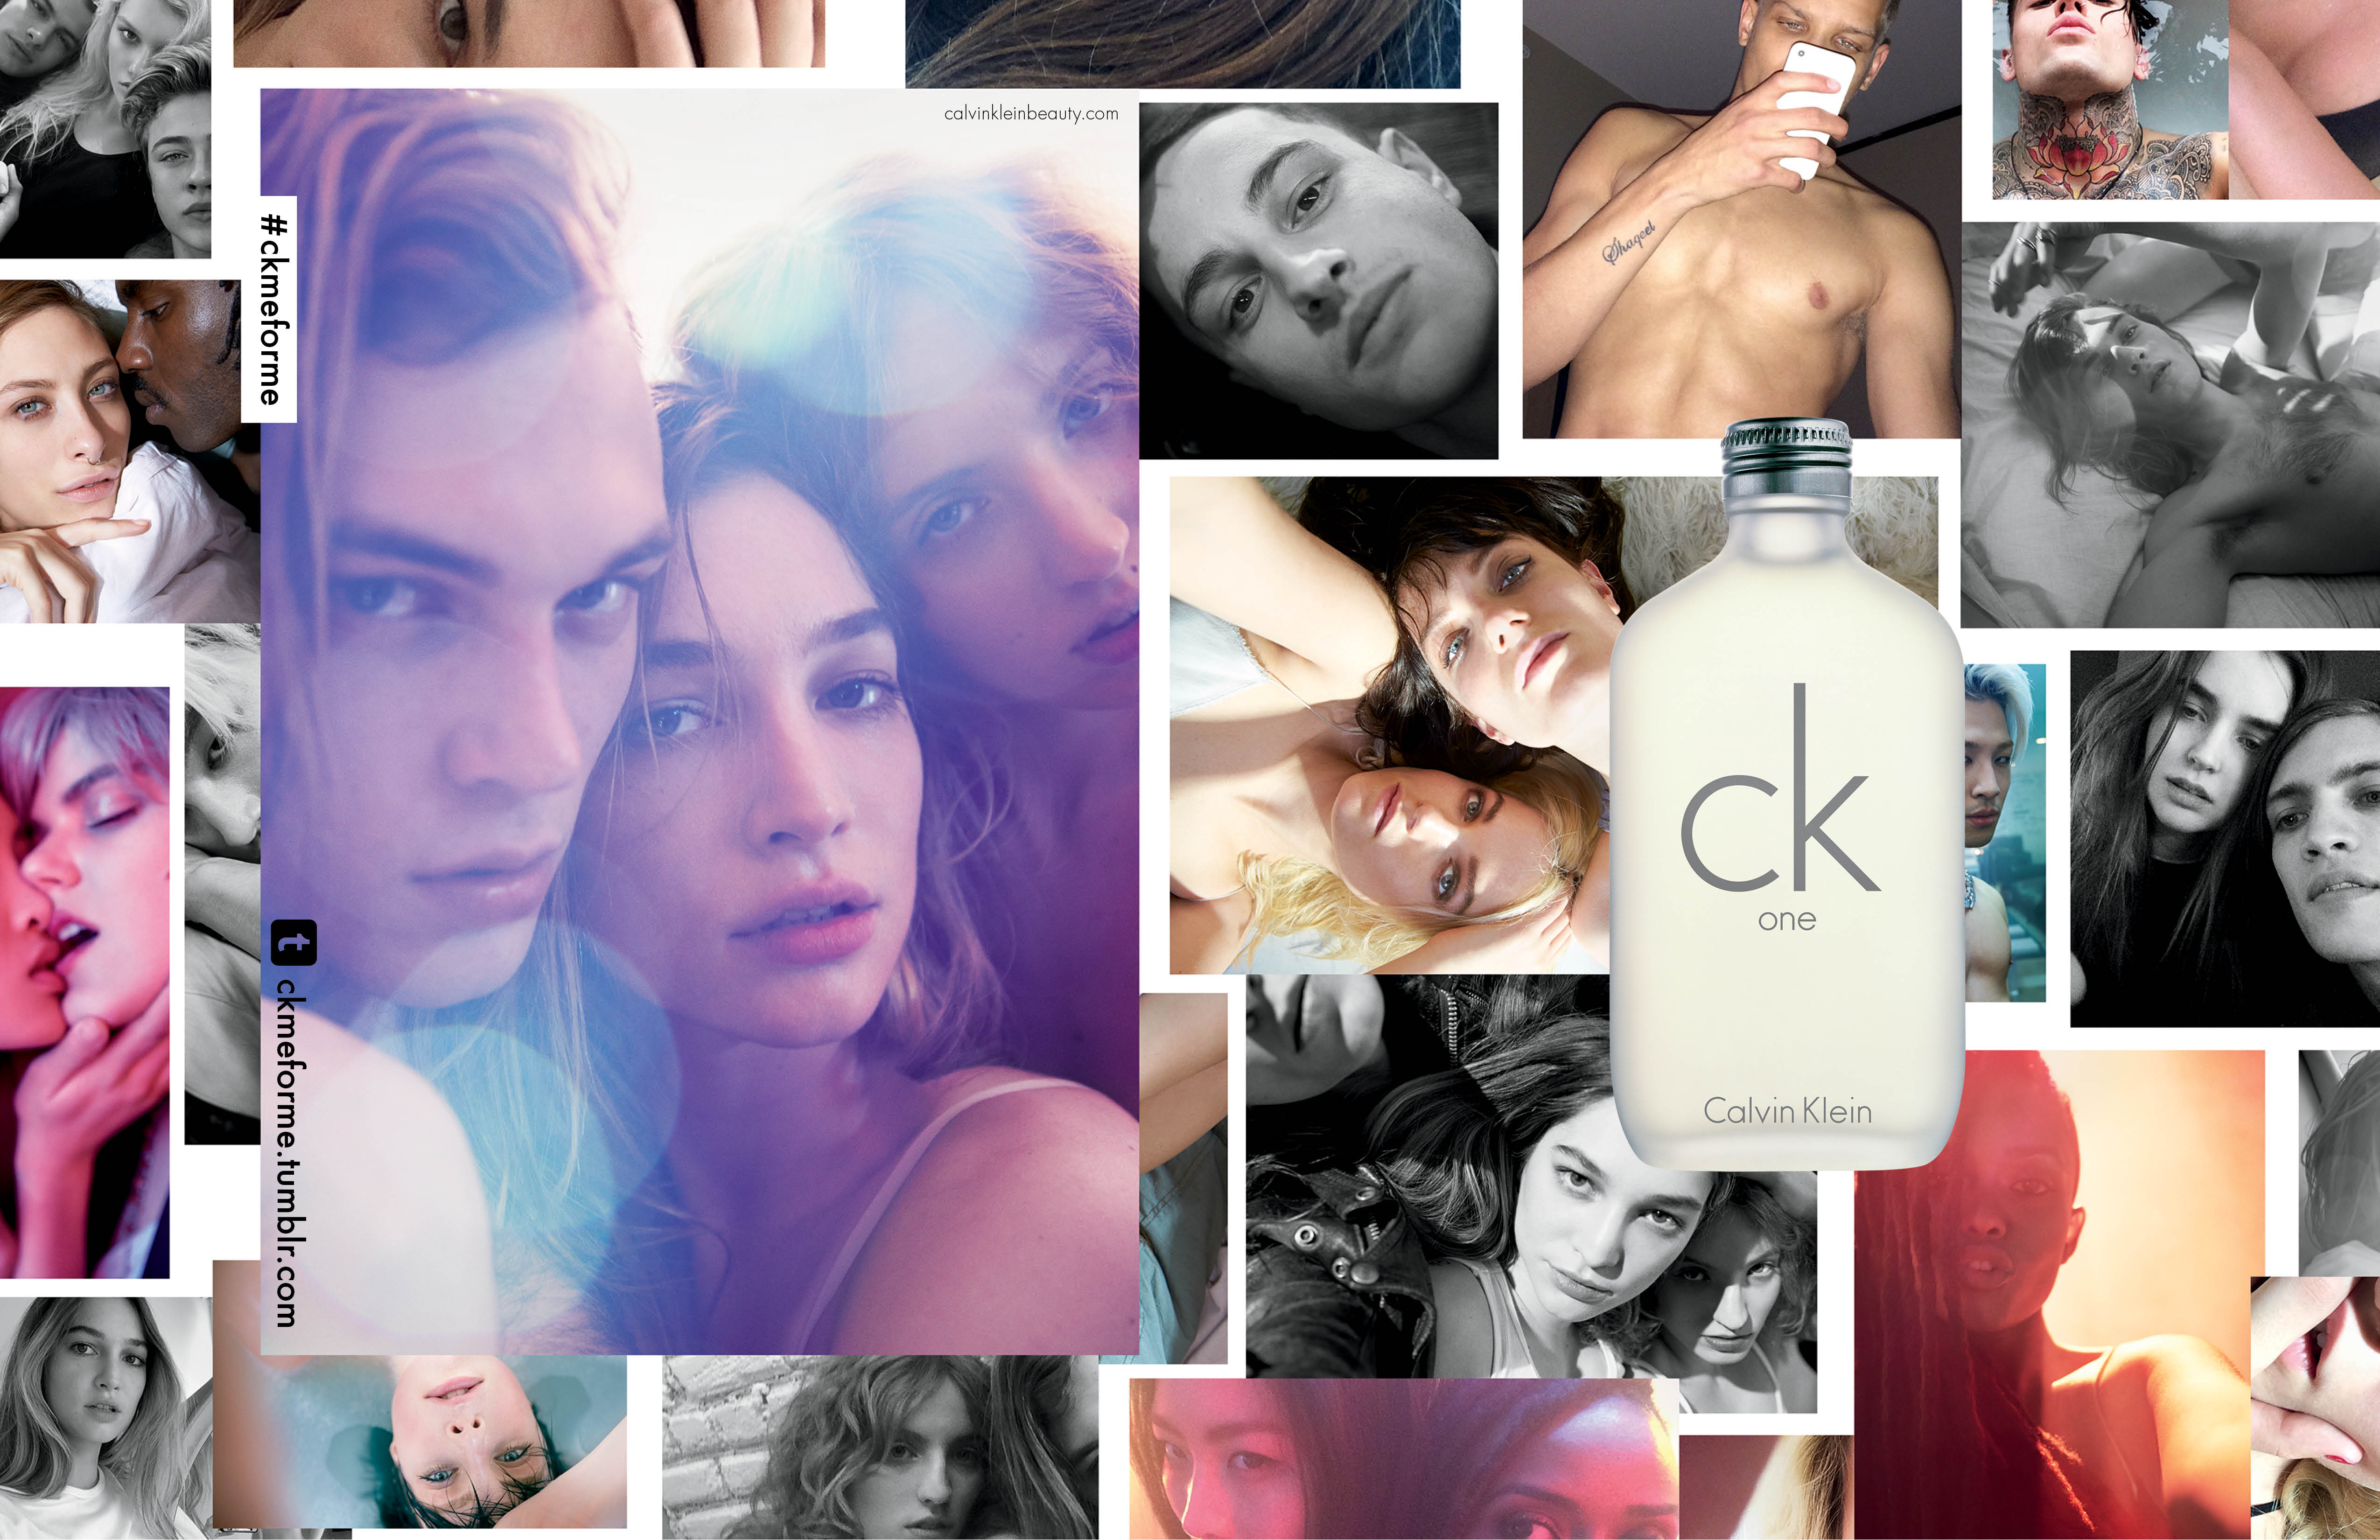 Calvin Klein CK One fragrance – July 2014 – Edie Campbell